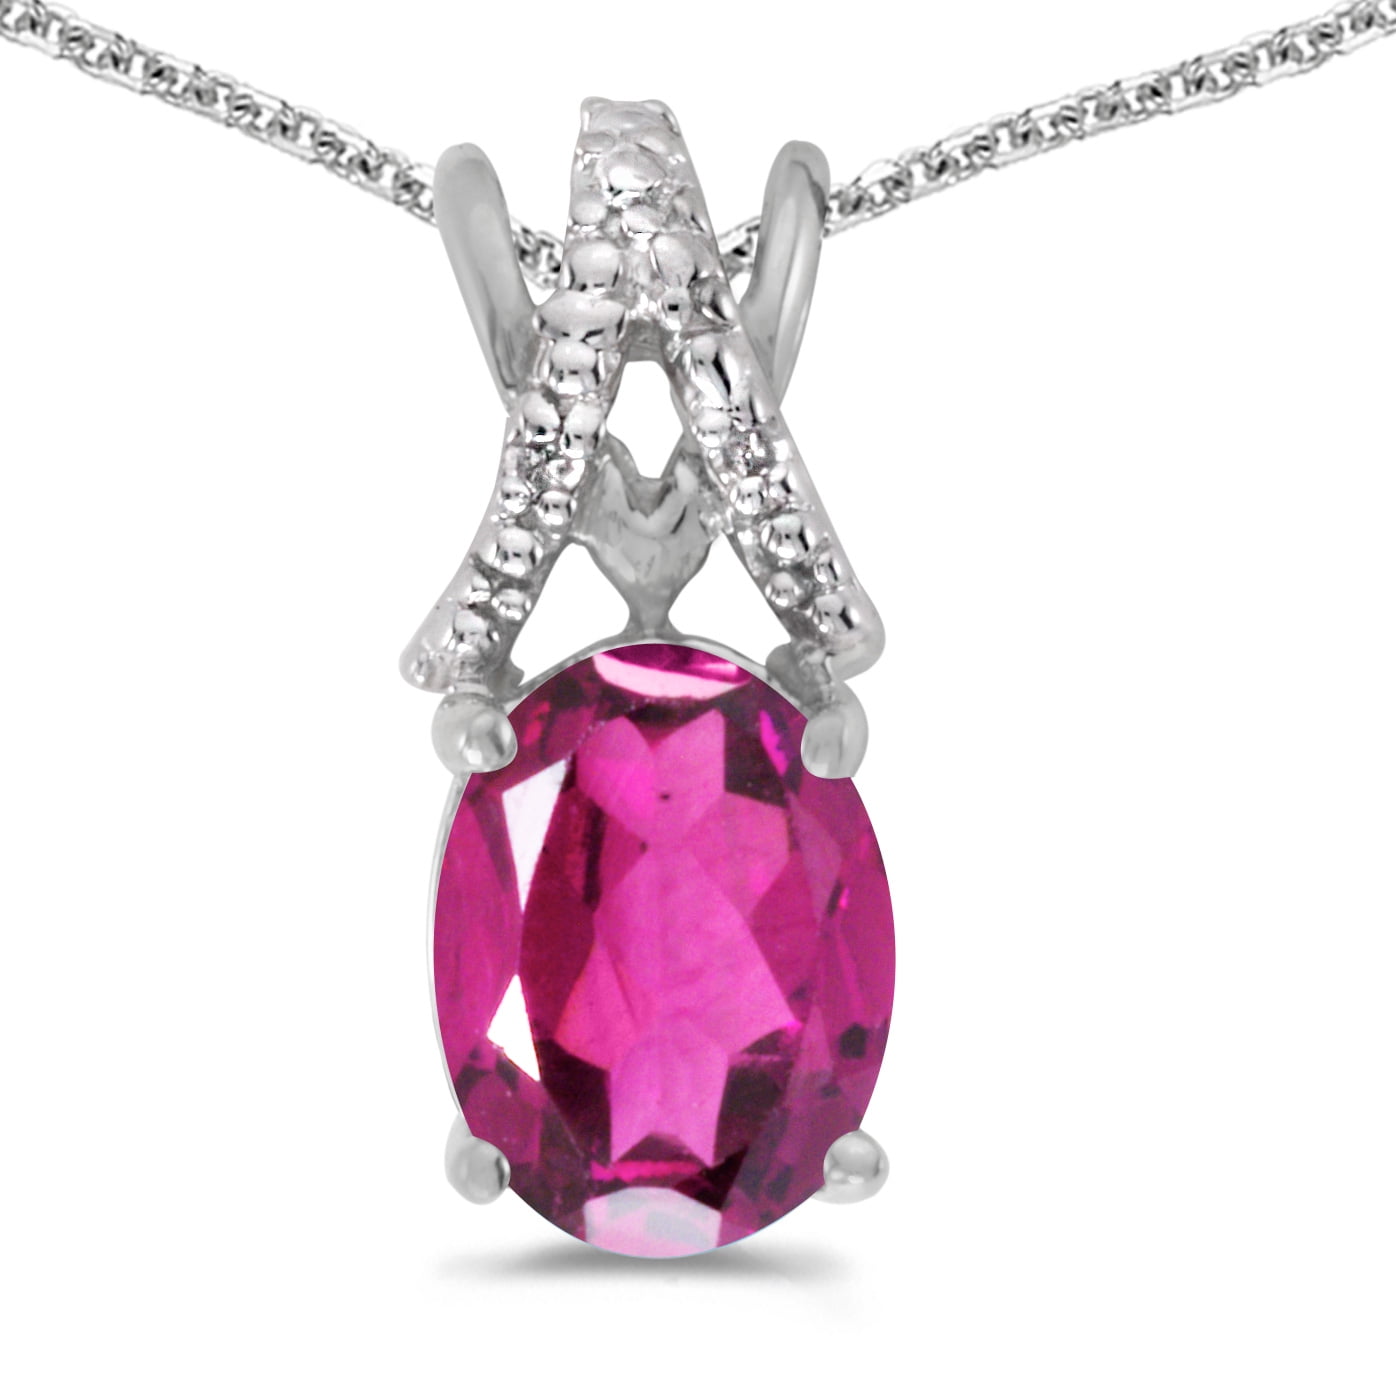 Details about   14k White Gold Oval Pink Topaz And Diamond Pendant with 18" Chain 